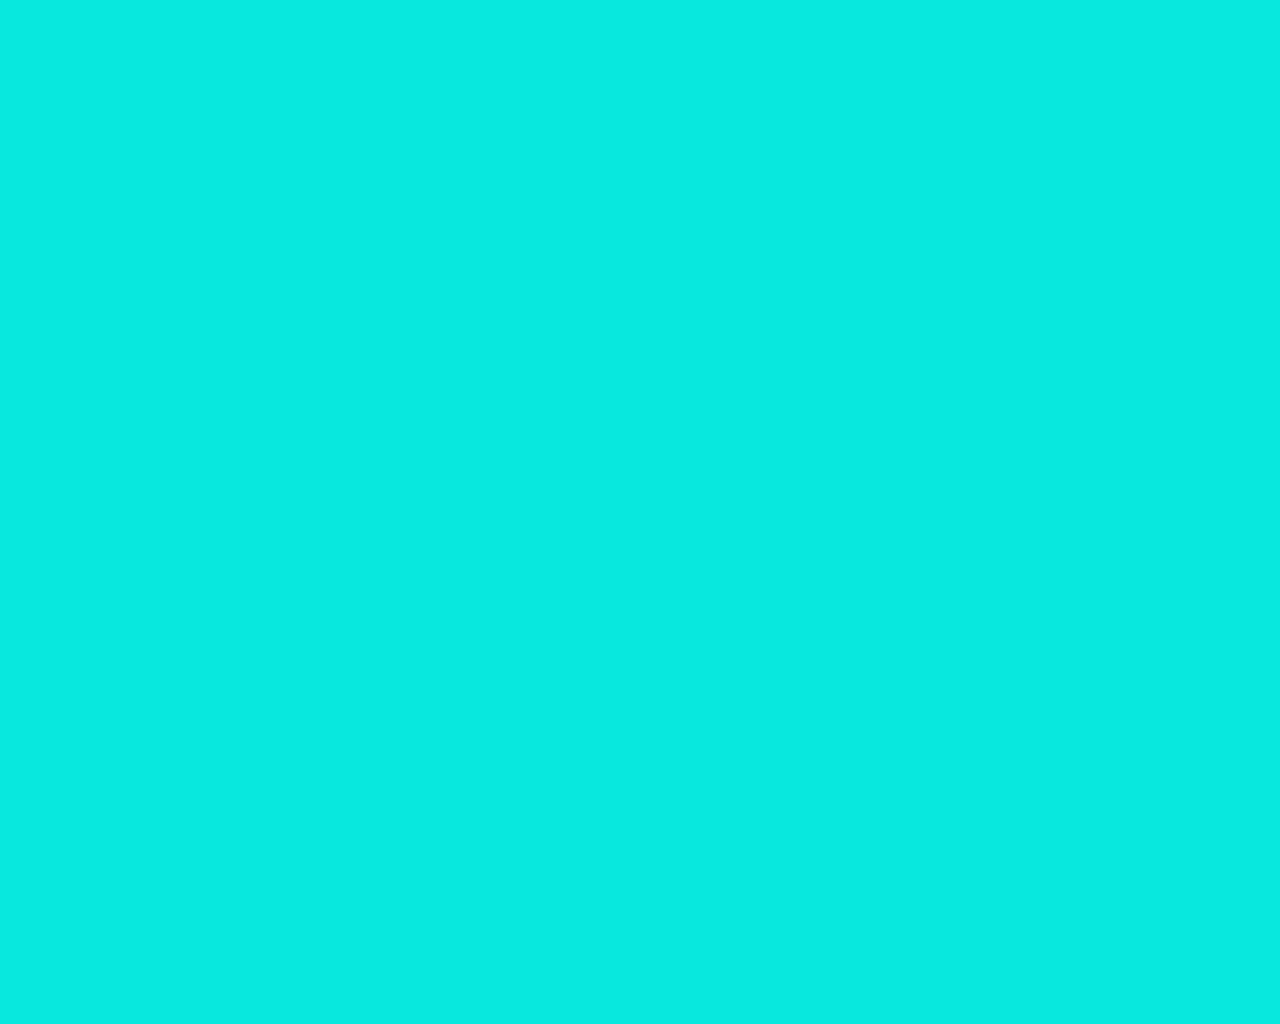 Turquoise Background Wallpaper Pictures To